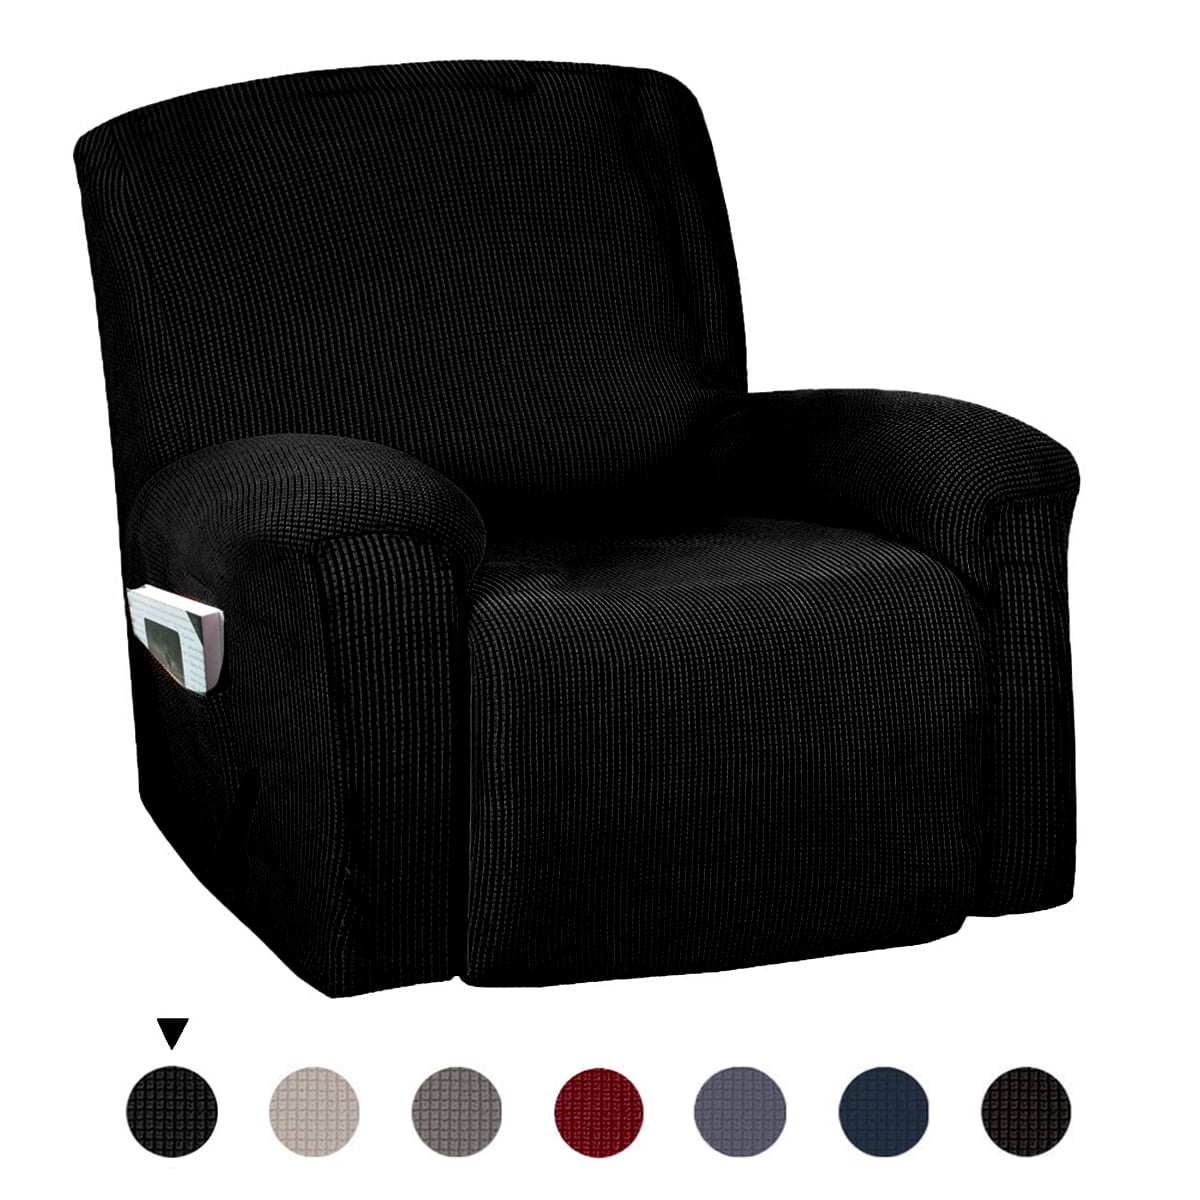 Waterproof Stretch Washable Recliner Chair Furniture Slipcover Cover Protector 